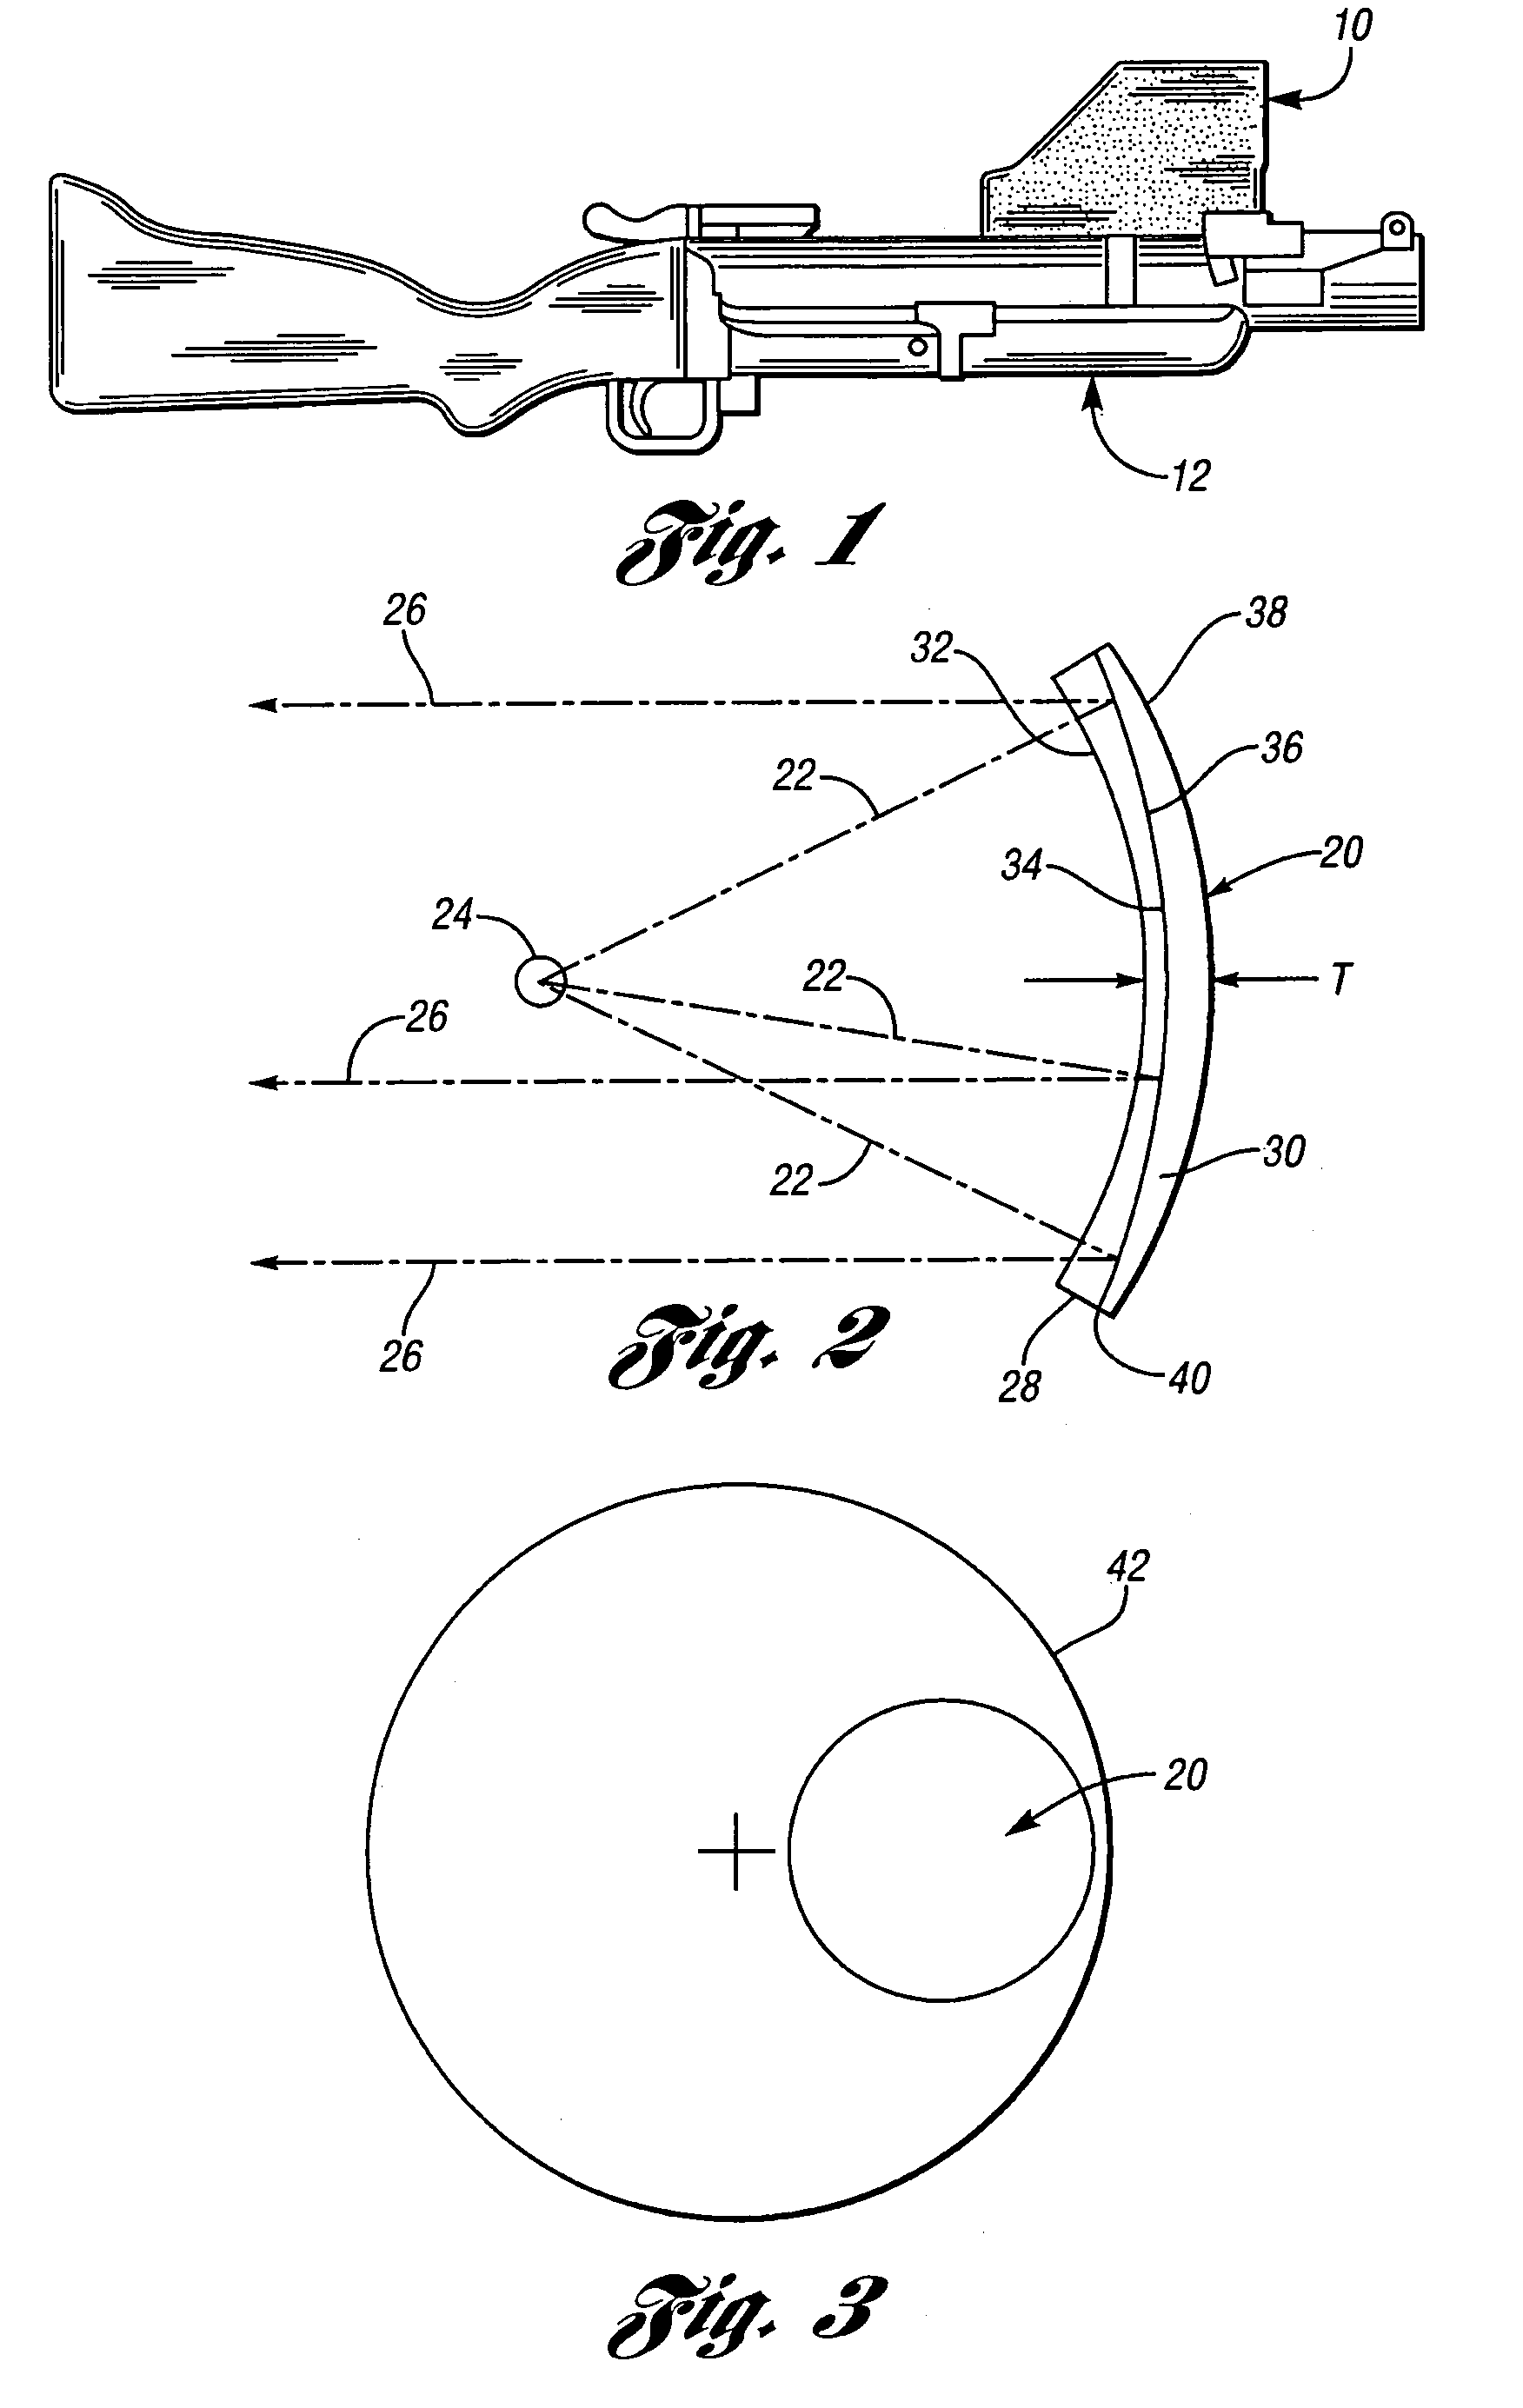 Aiming sight having fixed light emitting diode (LED) array and rotatable collimator